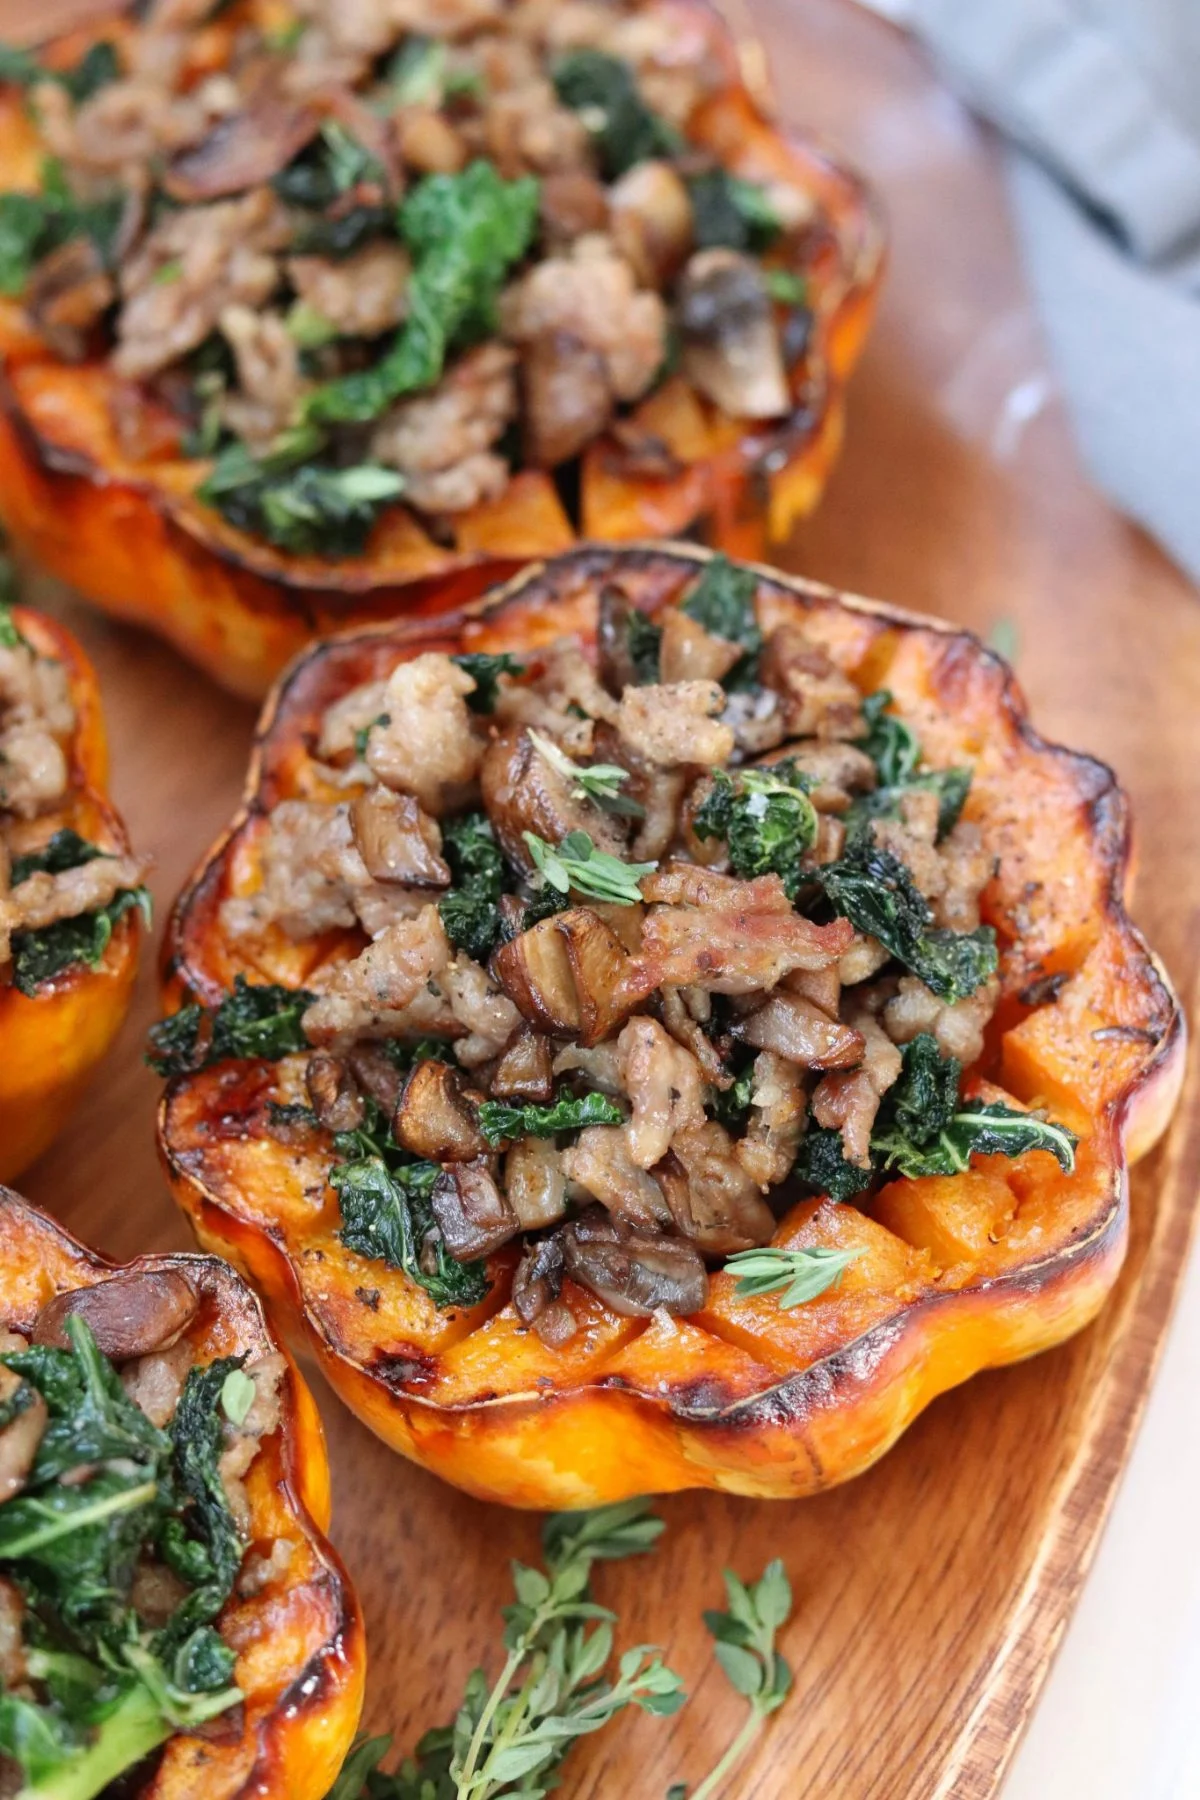 Sausage-stuffed squash with mushrooms and spinach on a wooden cutting board.